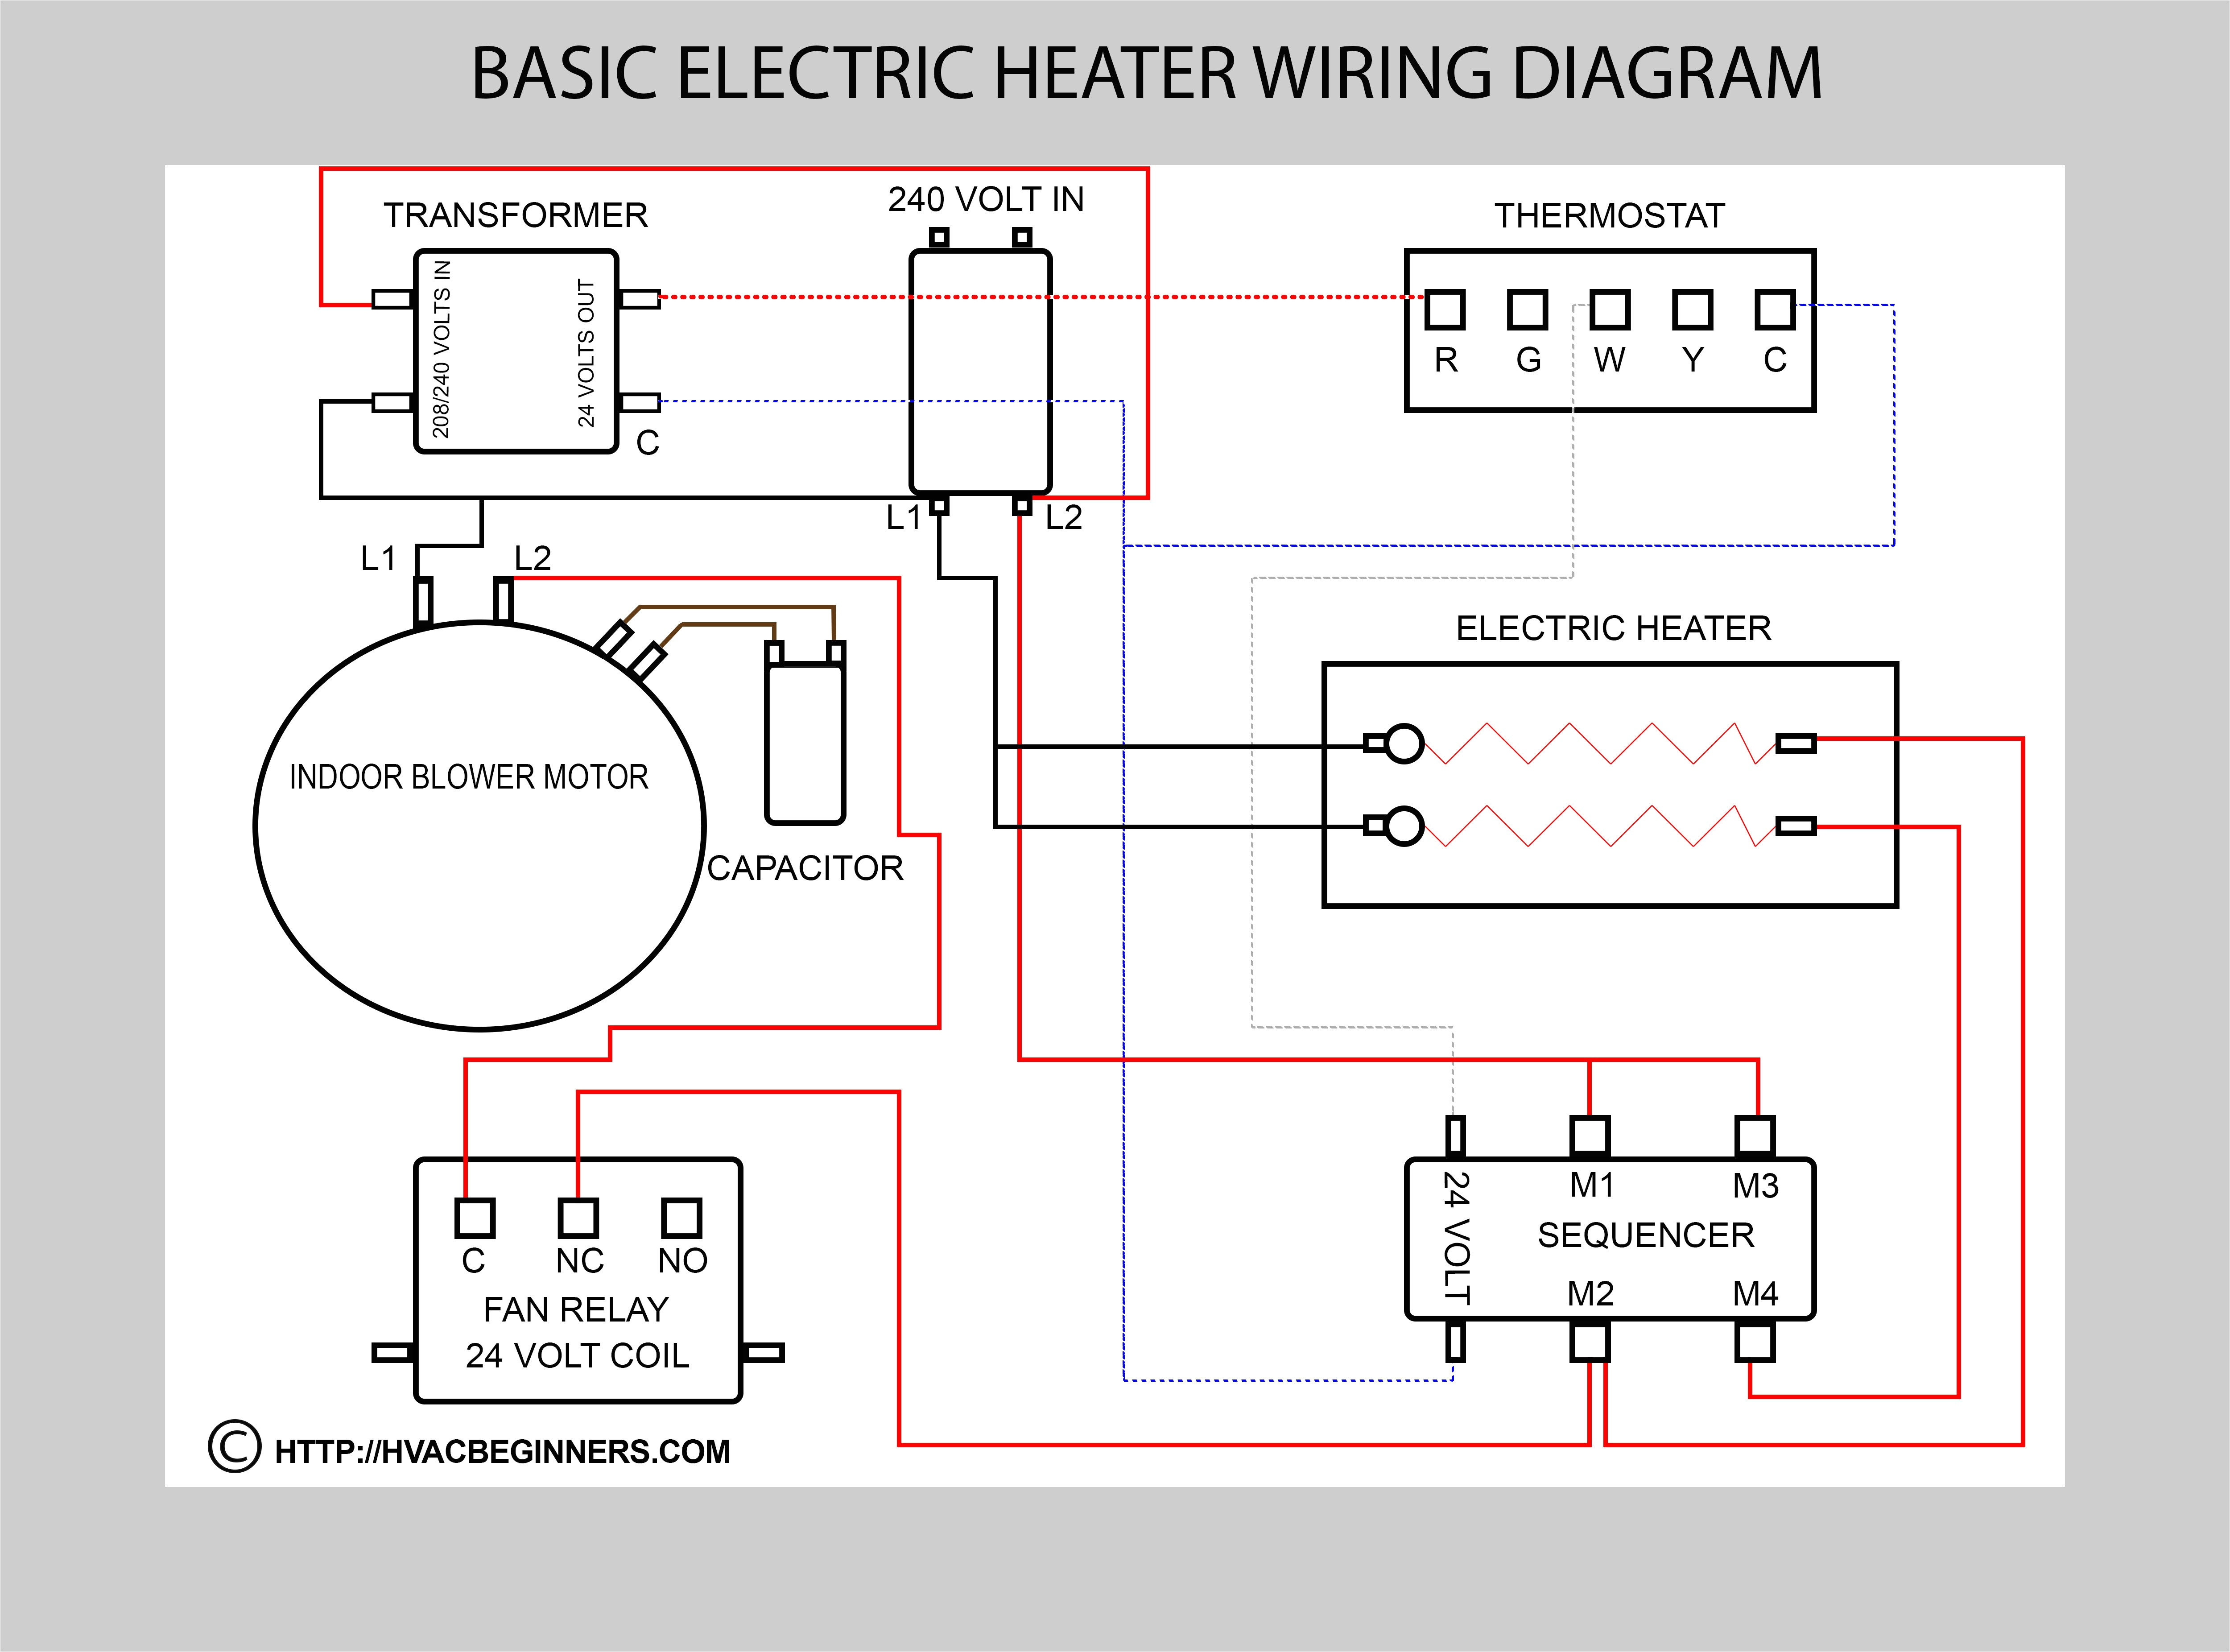 coleman furnace thermostat wiring diagram free download wiring payne furnace thermostat wiring diagram free download